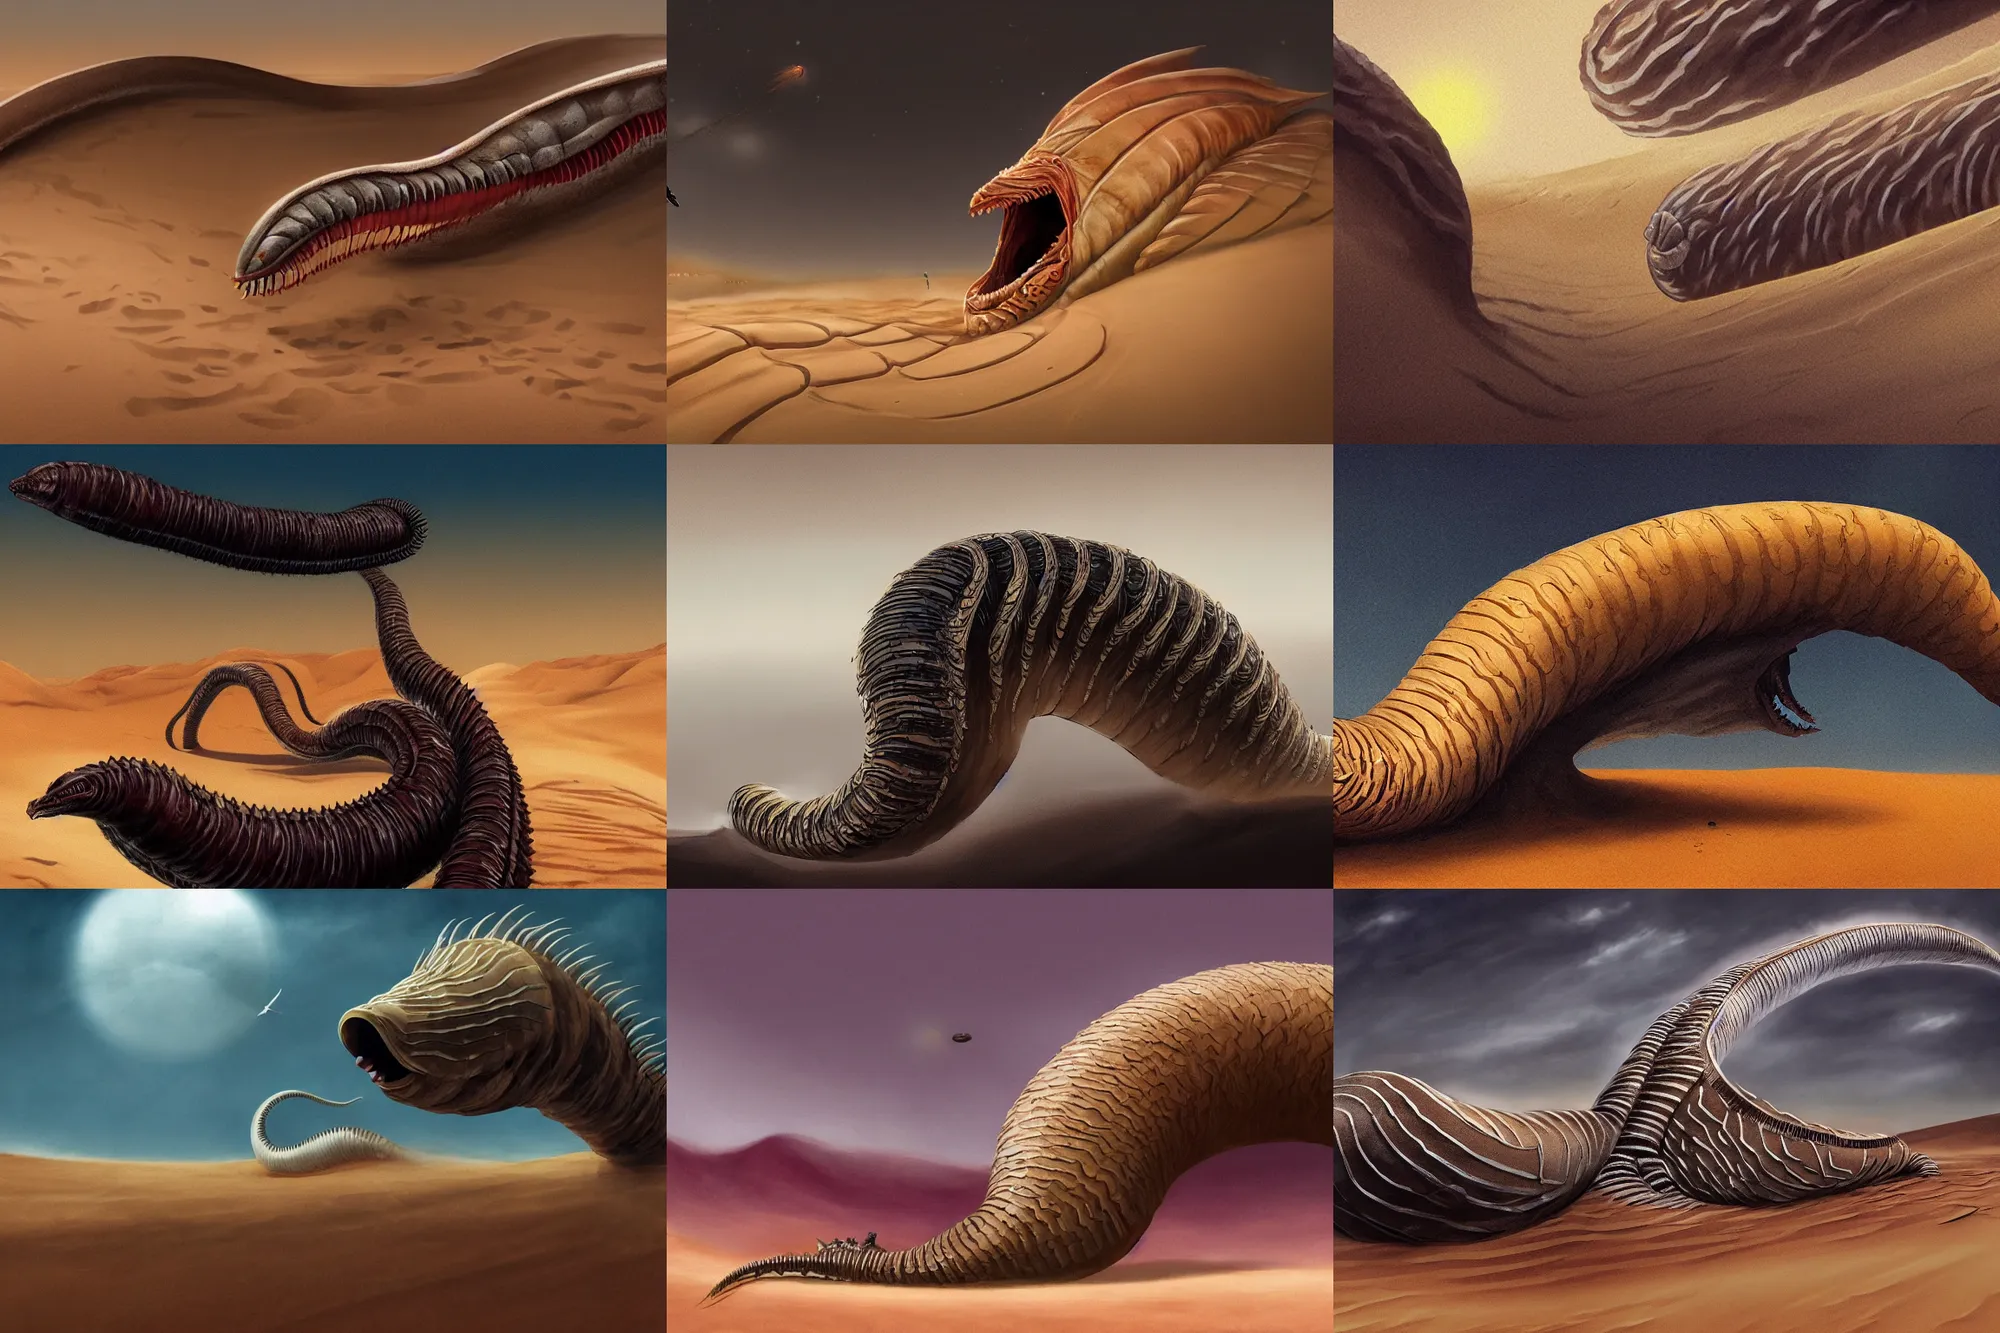 dune, huge sandworm unleashed out of sand in a desert